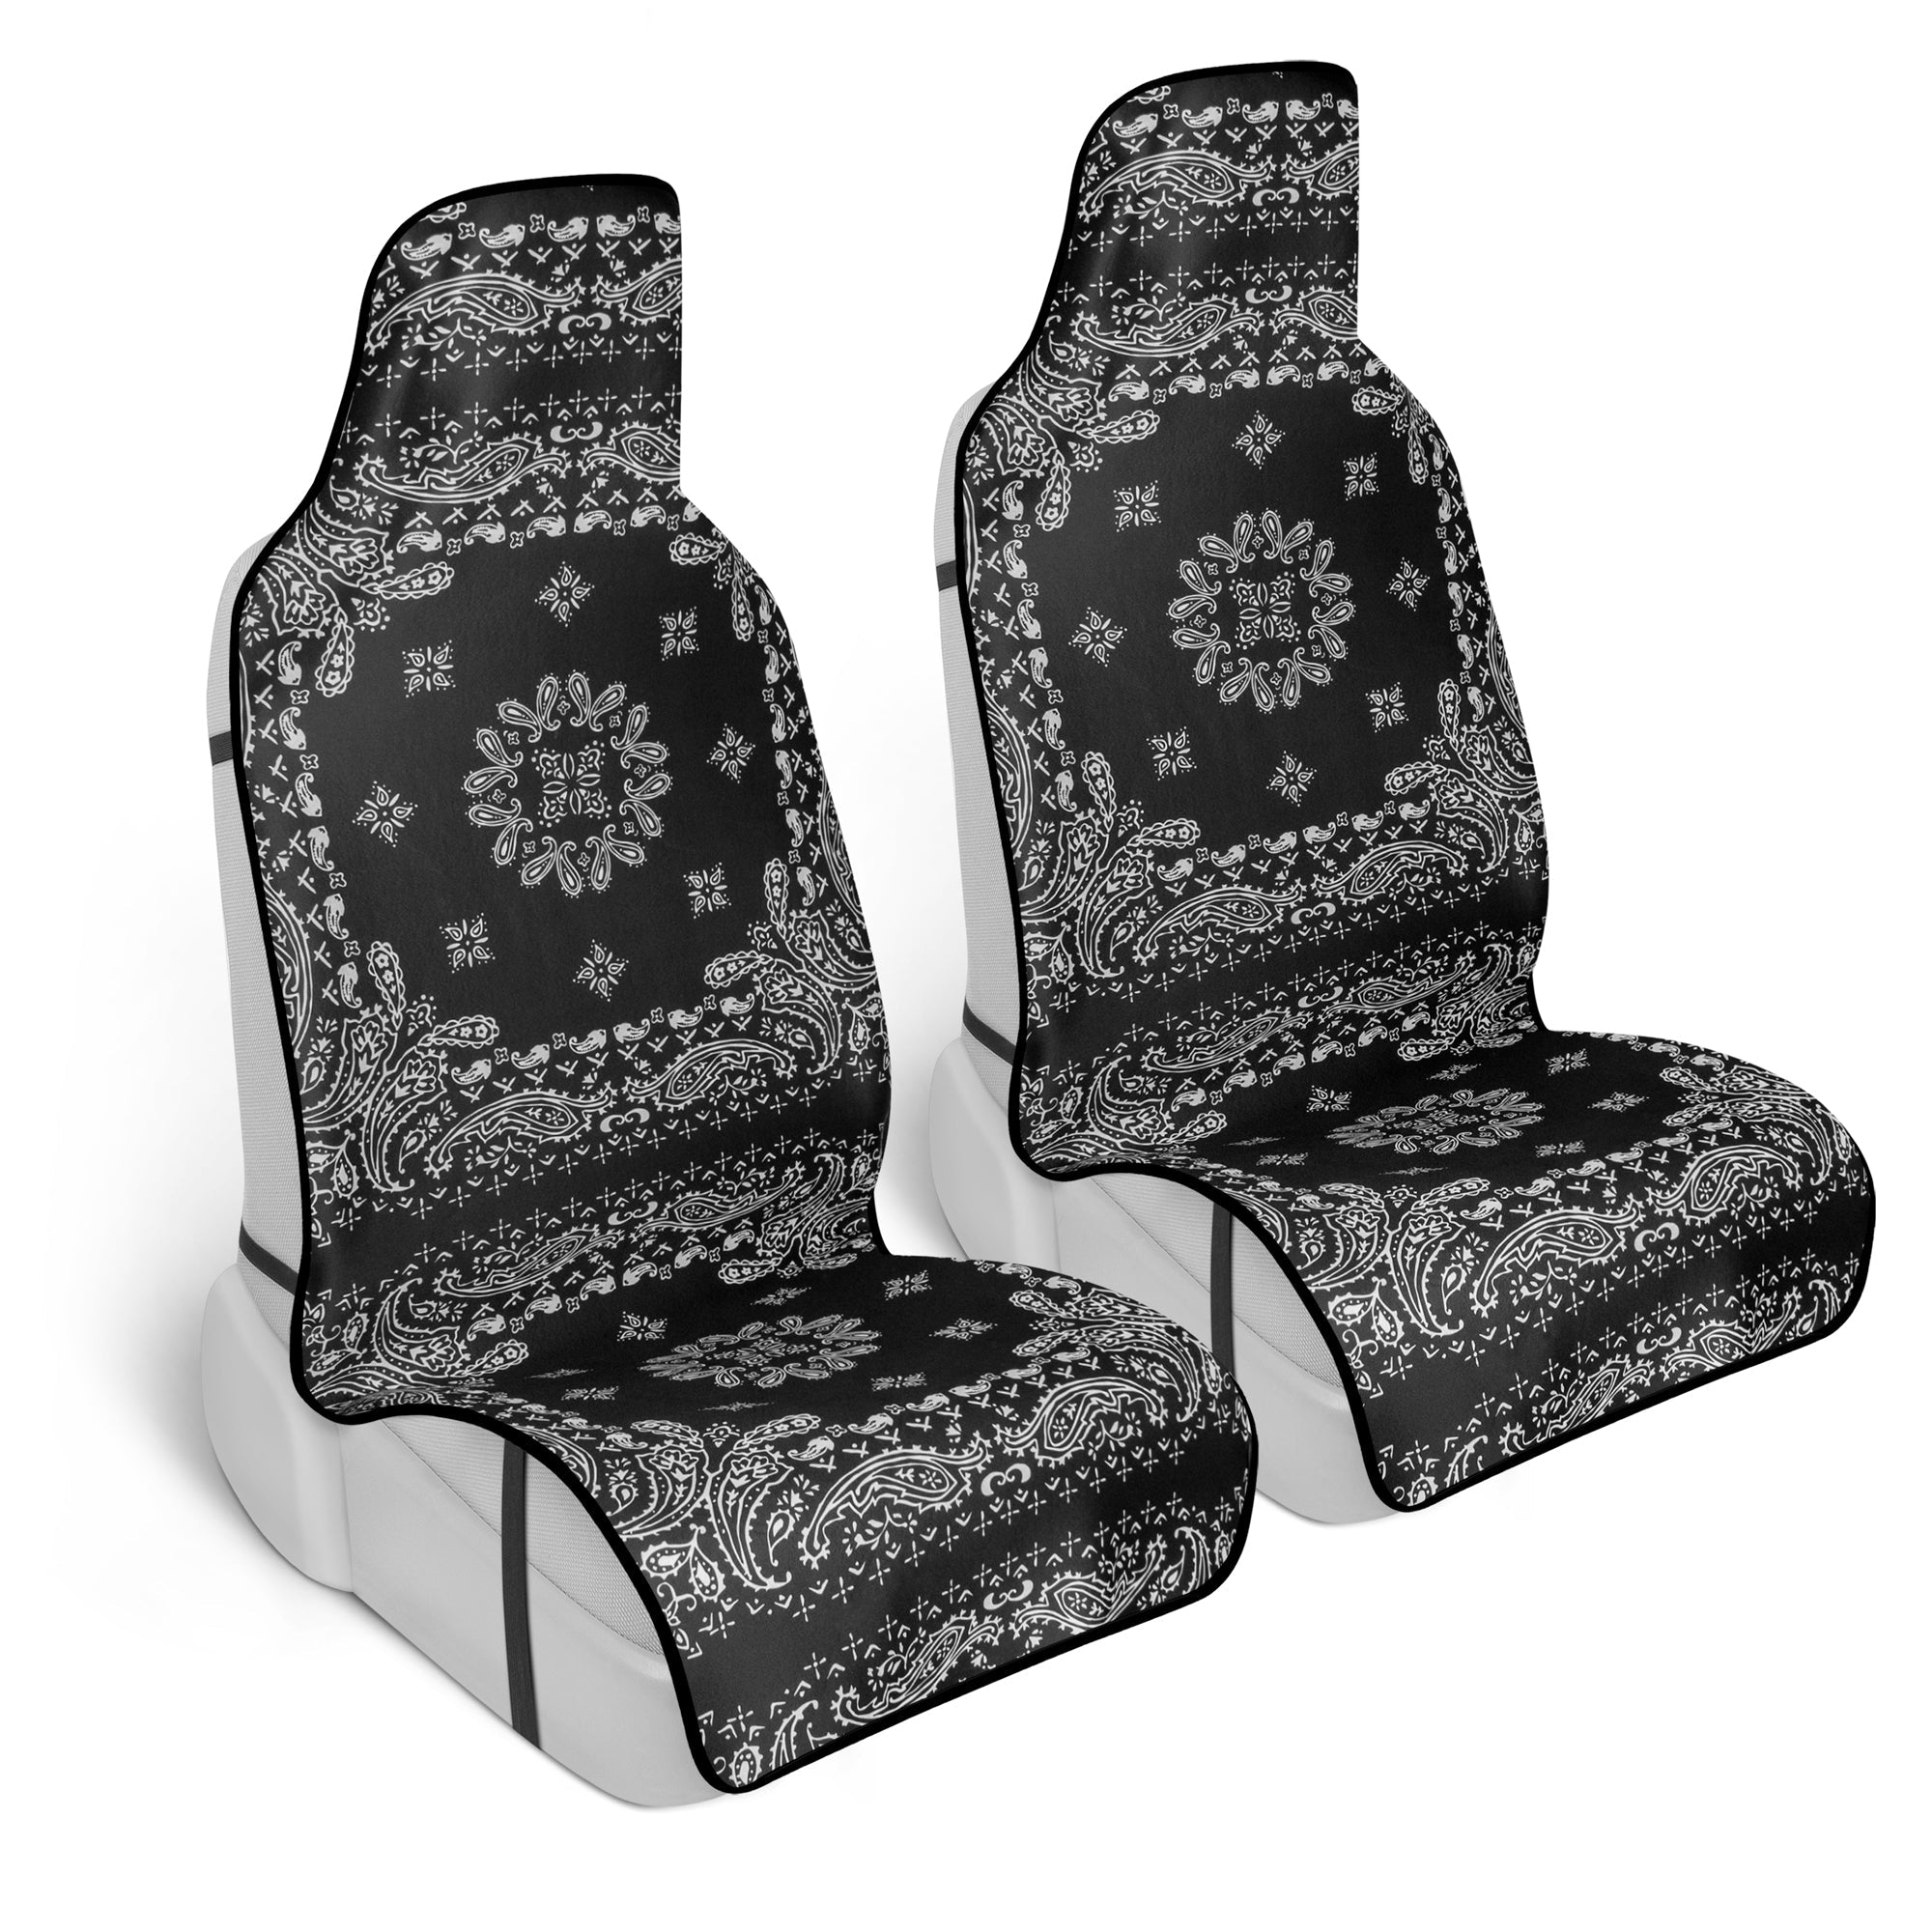 Carbella Black Paisley Bandana Car Seat Covers, 2 Pack Western Print Front Seat Covers for Cars Trucks SUV, Car Accessories for Women